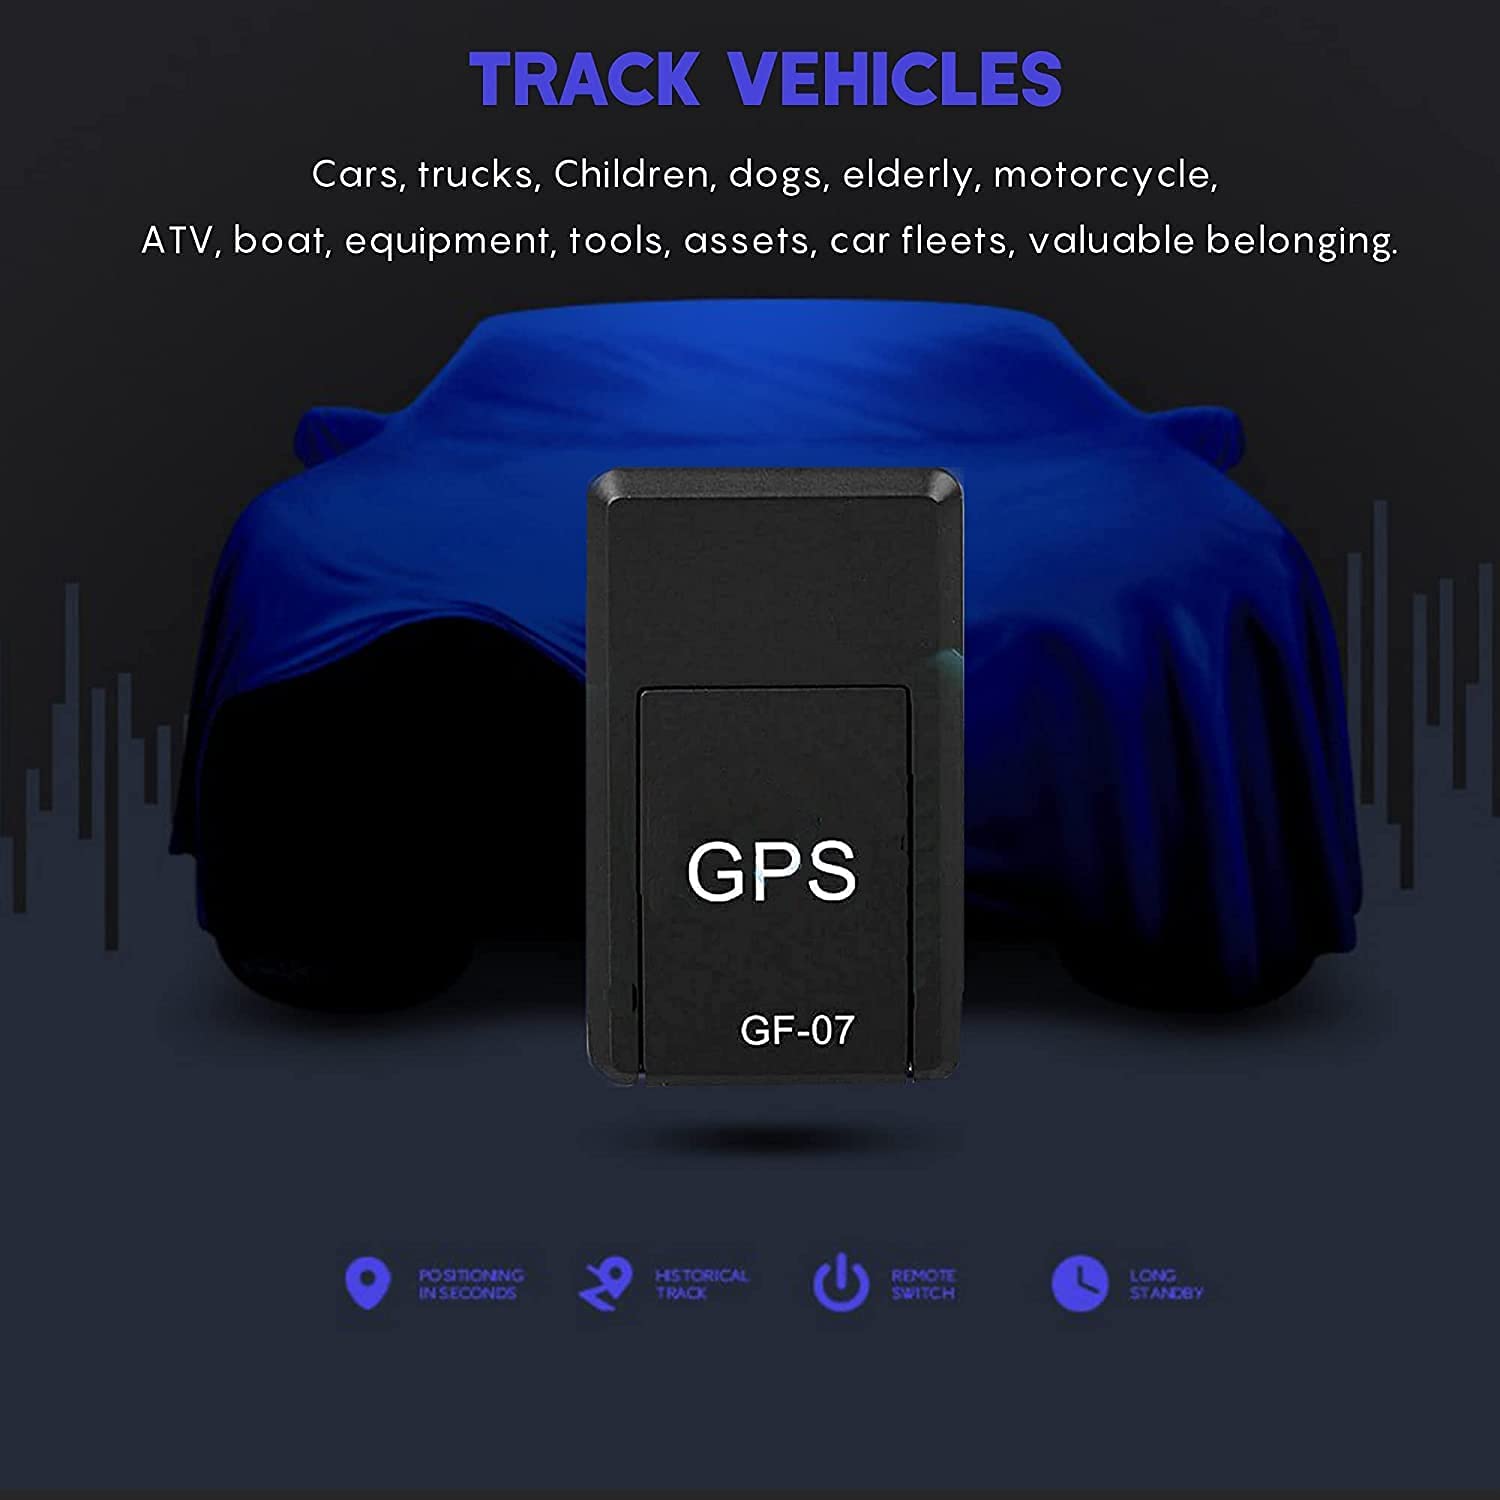 SANOXY Mini-Magnetic GPS Tracker Real-Time Car Truck Vehicle Locator GSM  GPRS PPT-GPS1 - The Home Depot